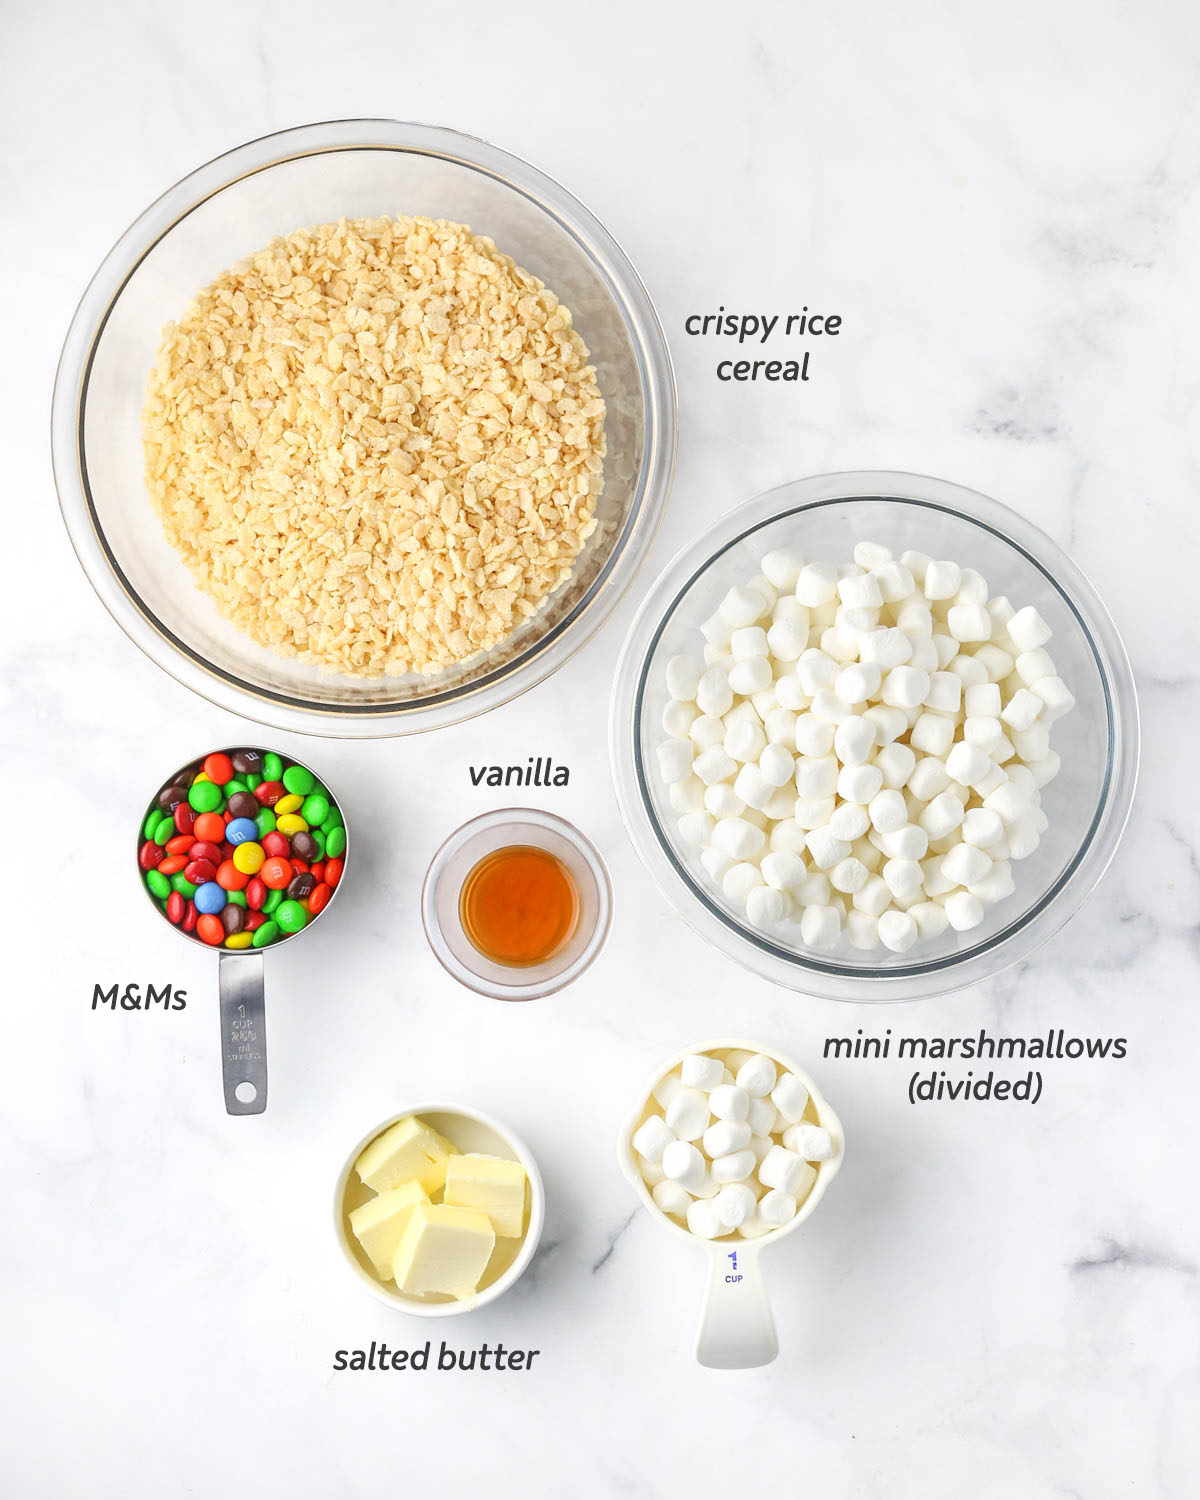 all 5 ingredients to make the rice krispie treats shown from above in bowls and measuring cups.